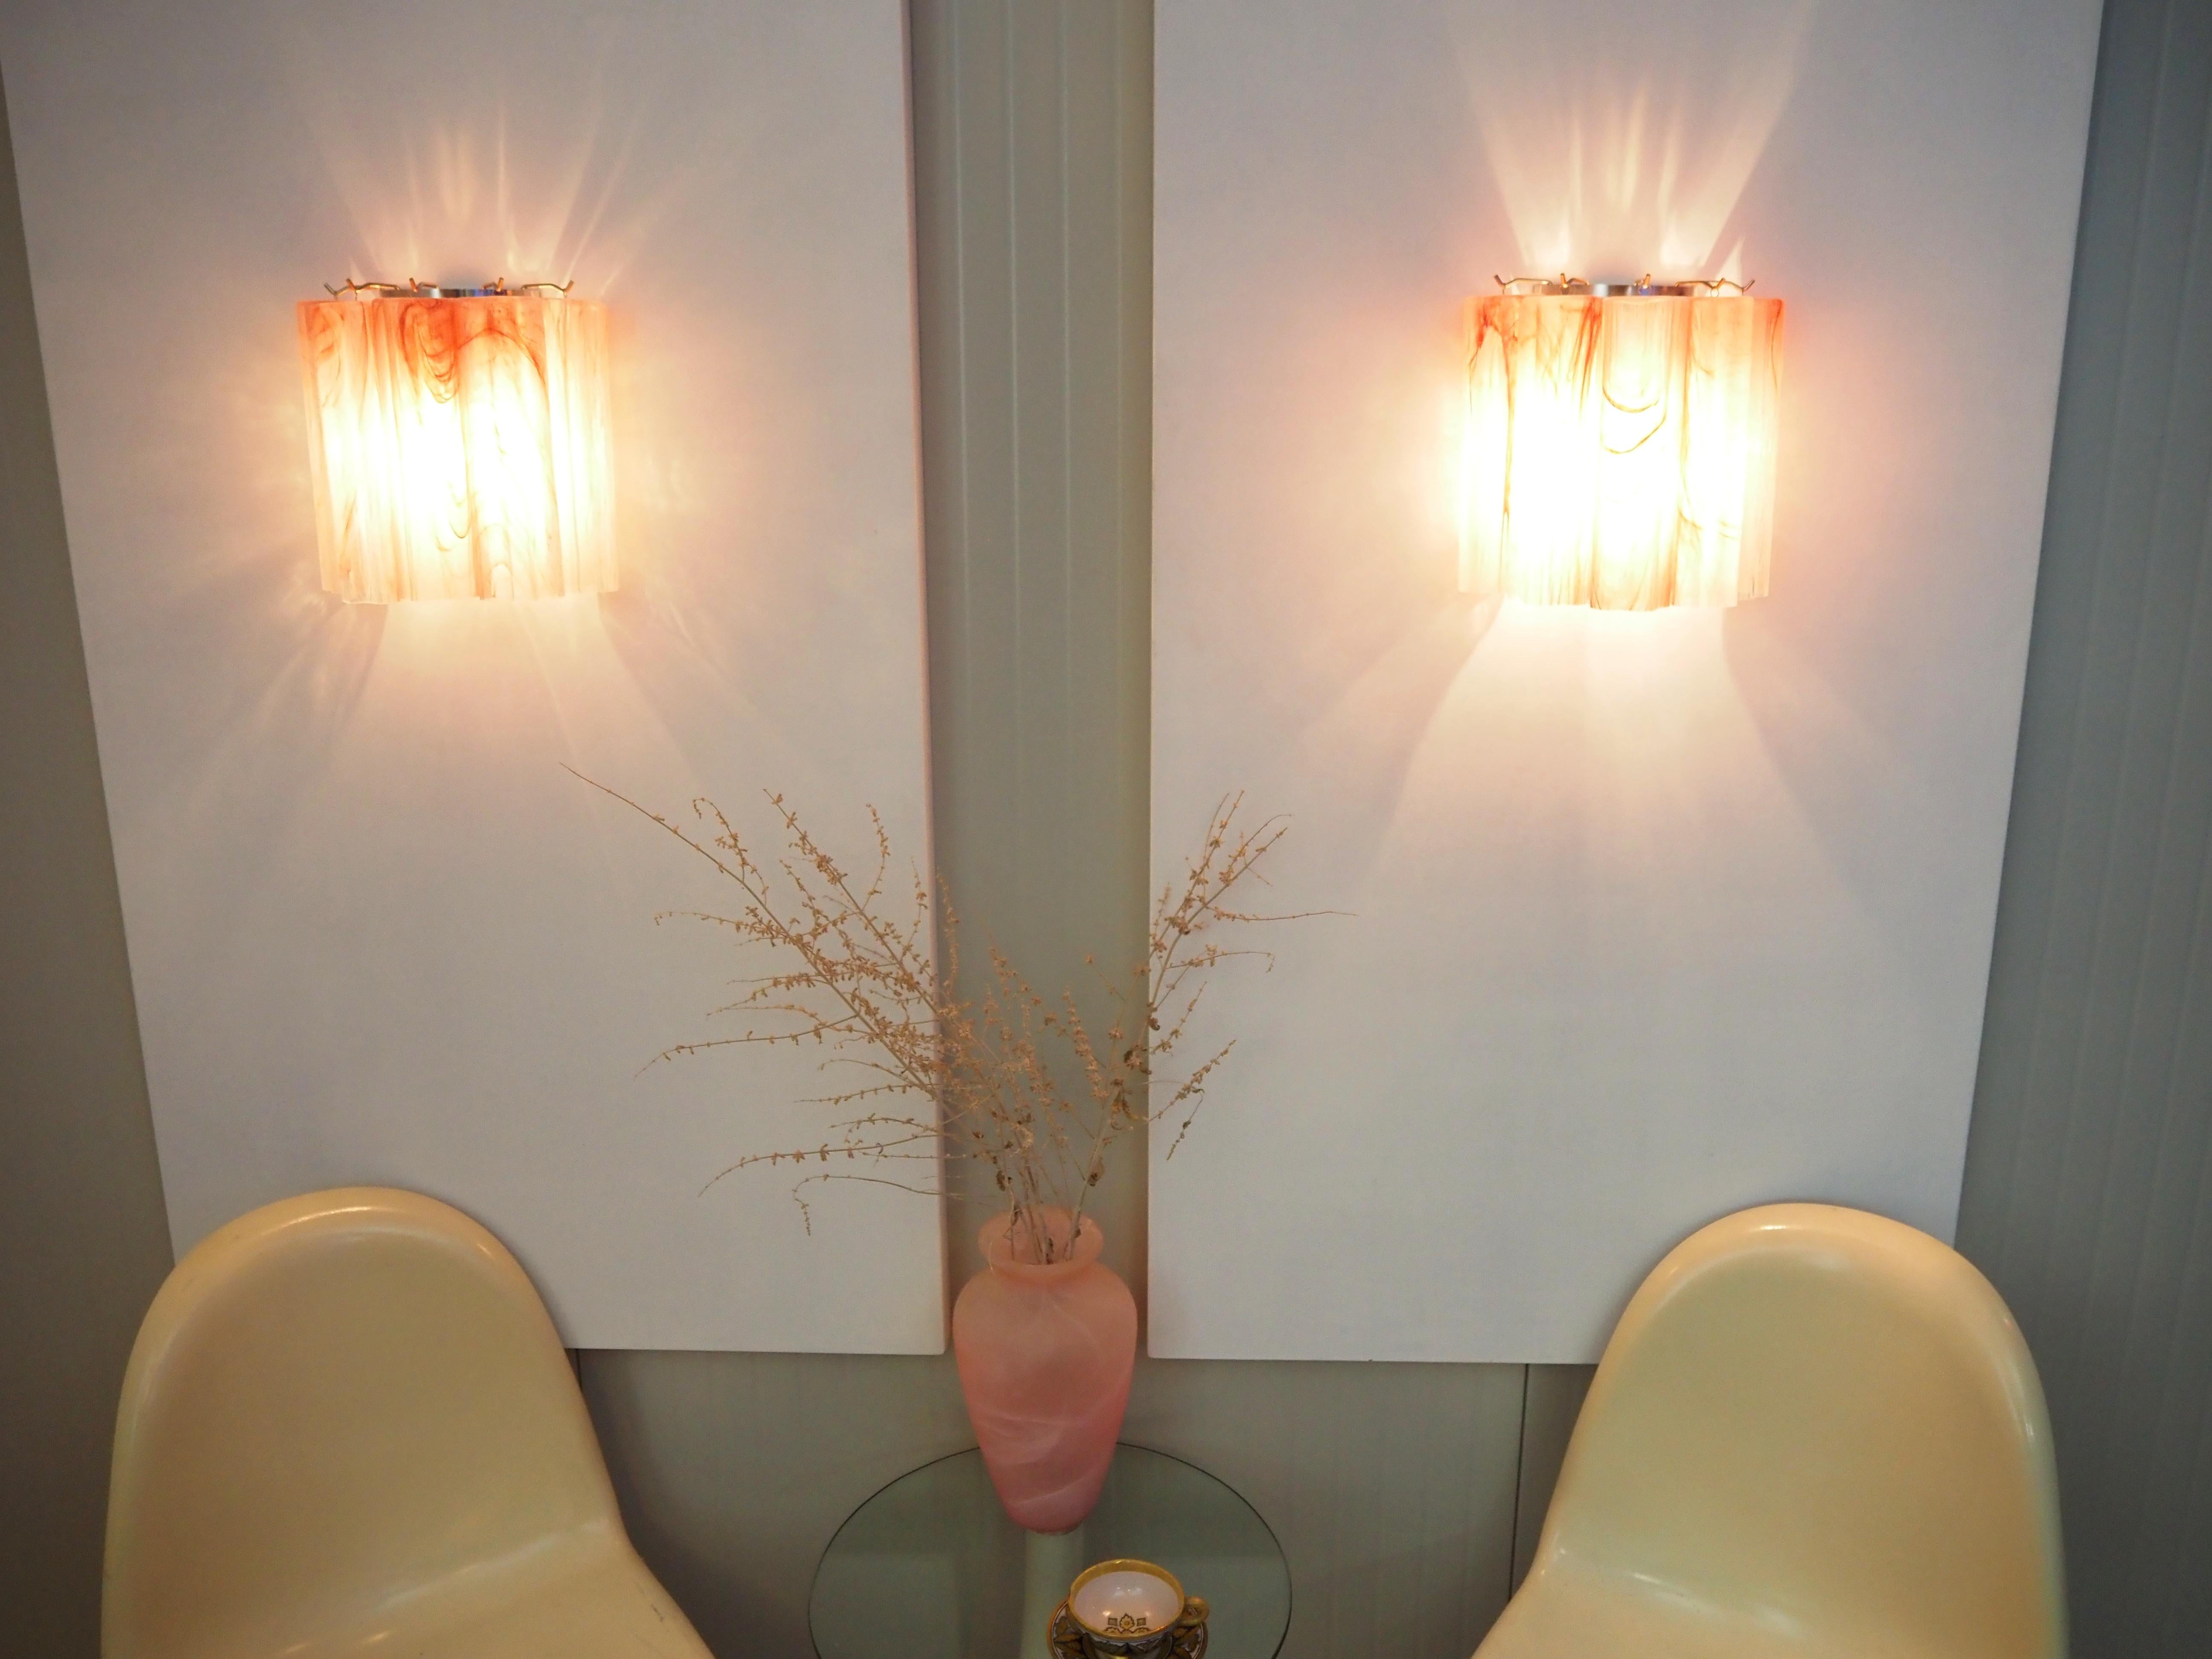 Galvanized Fantastic pair of Murano Glass Tube wall sconces - 5 pink alabaster glass tube For Sale